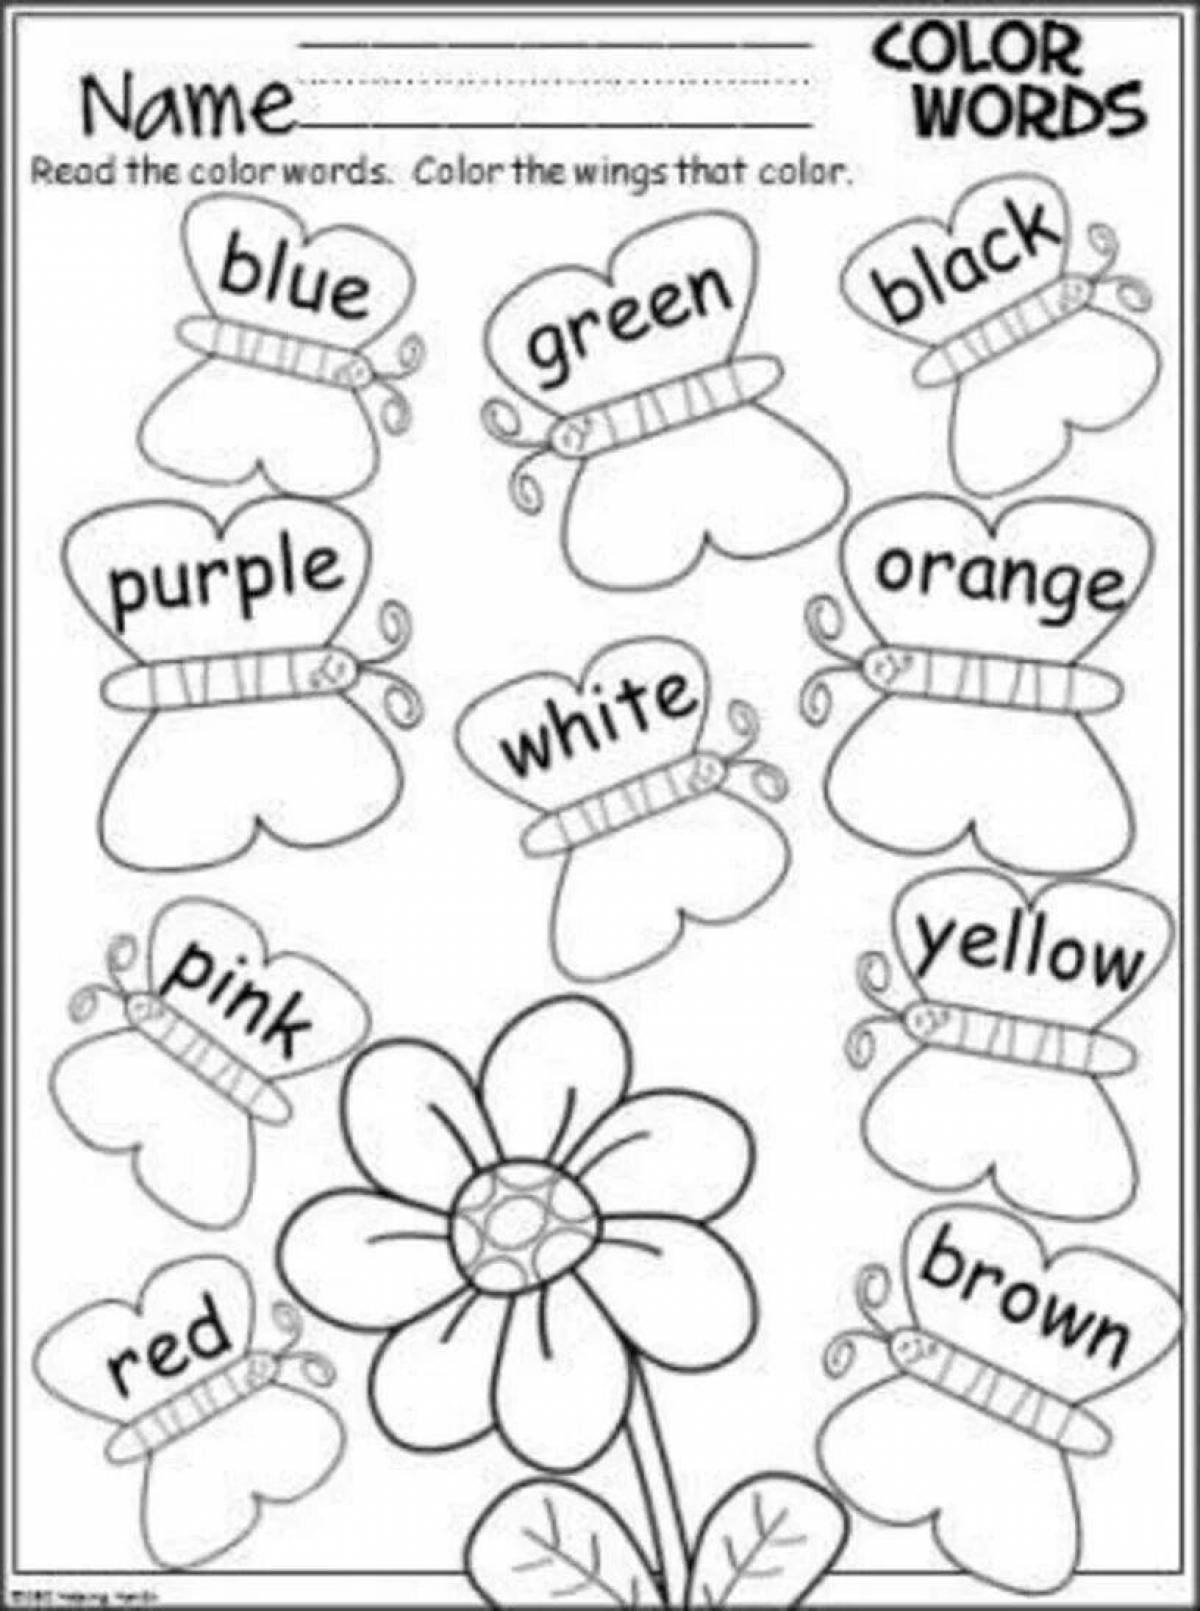 Radiant colors colors page colors in english for kids